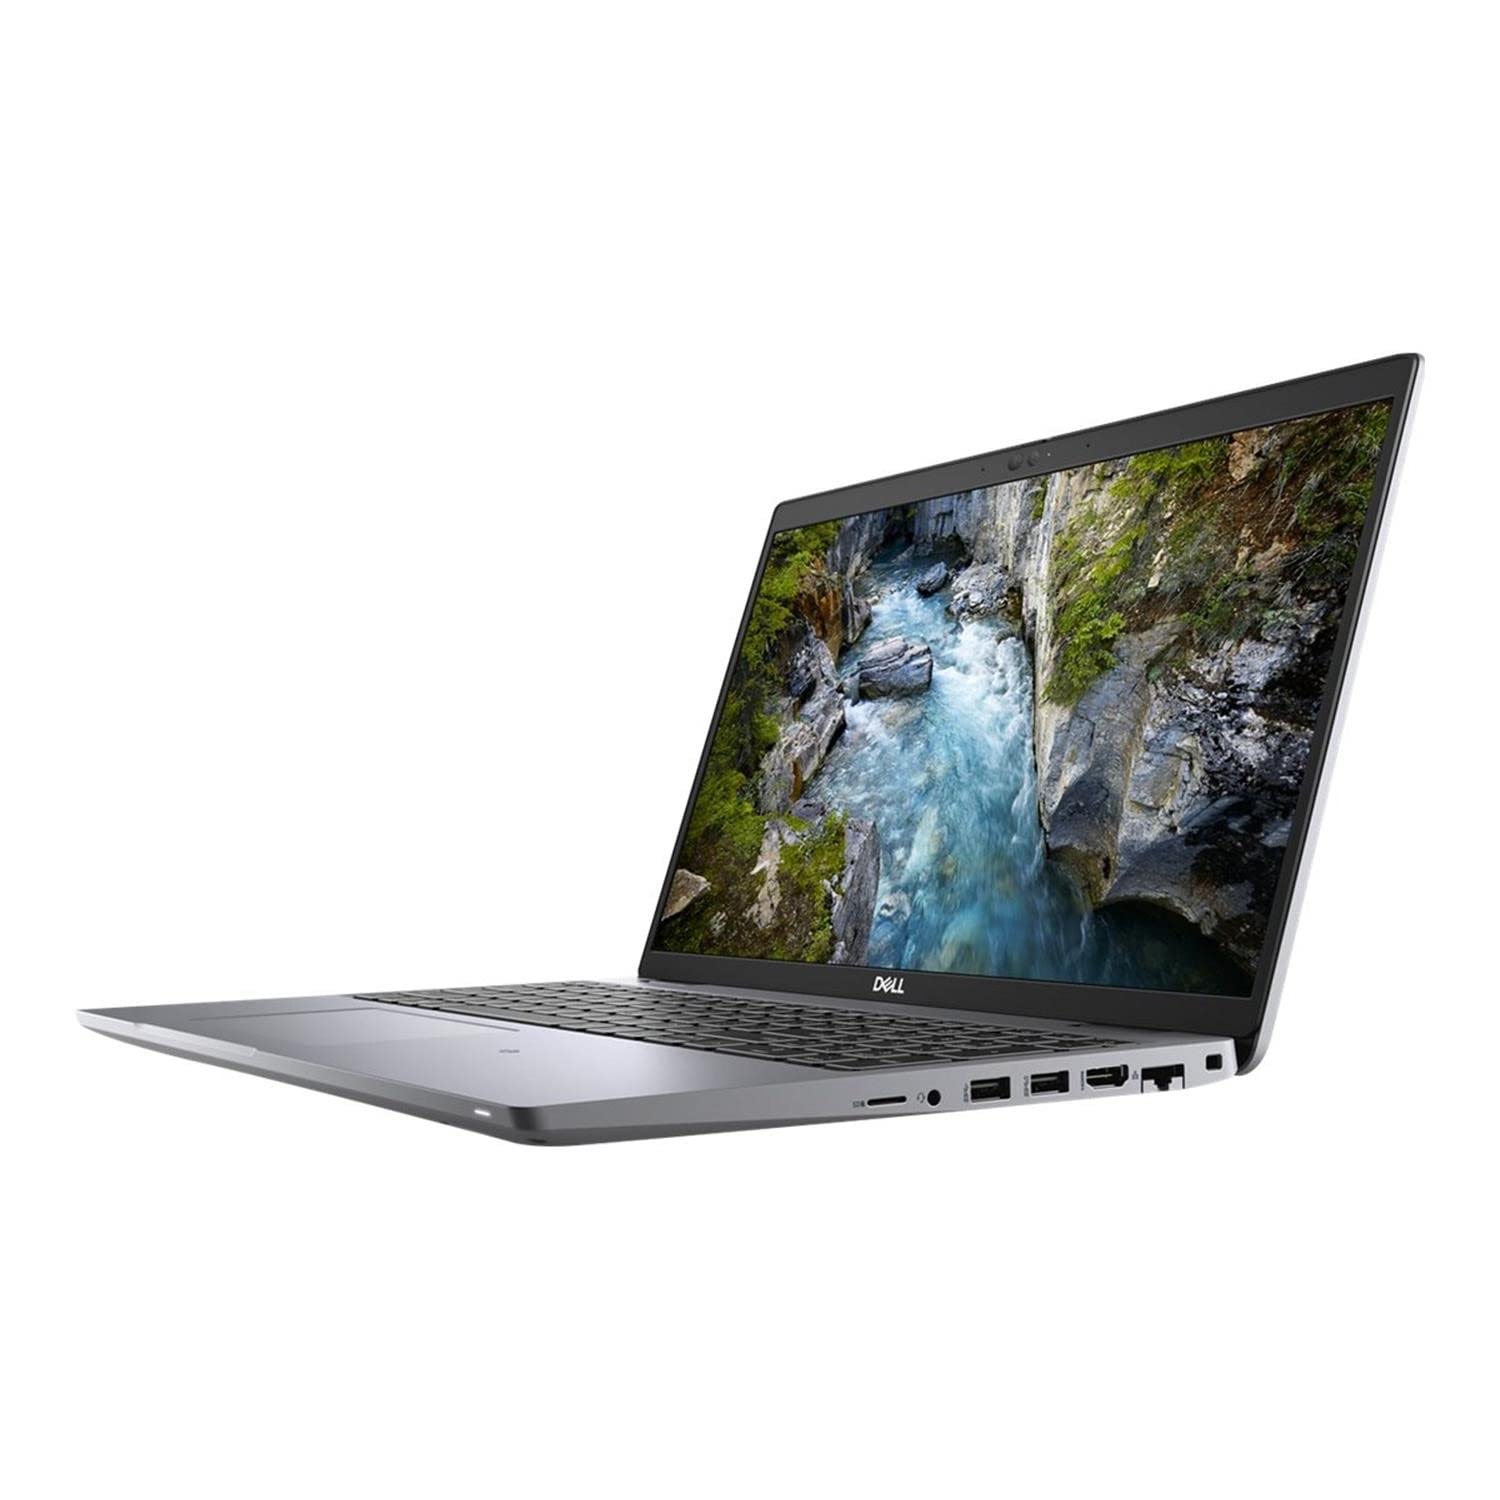 Dell Precision 3560 15.6" 2TB SSD Laptop - Core i7-1165G7 (4 Cores, 4.8GHz), Nvidia Quadro T500, 32GB DDR4, Smart Card Reader, WIFI 6 & BT 5.1, Free Upgrade to Windows 11 Pro, Backlit Keys (Renewed)